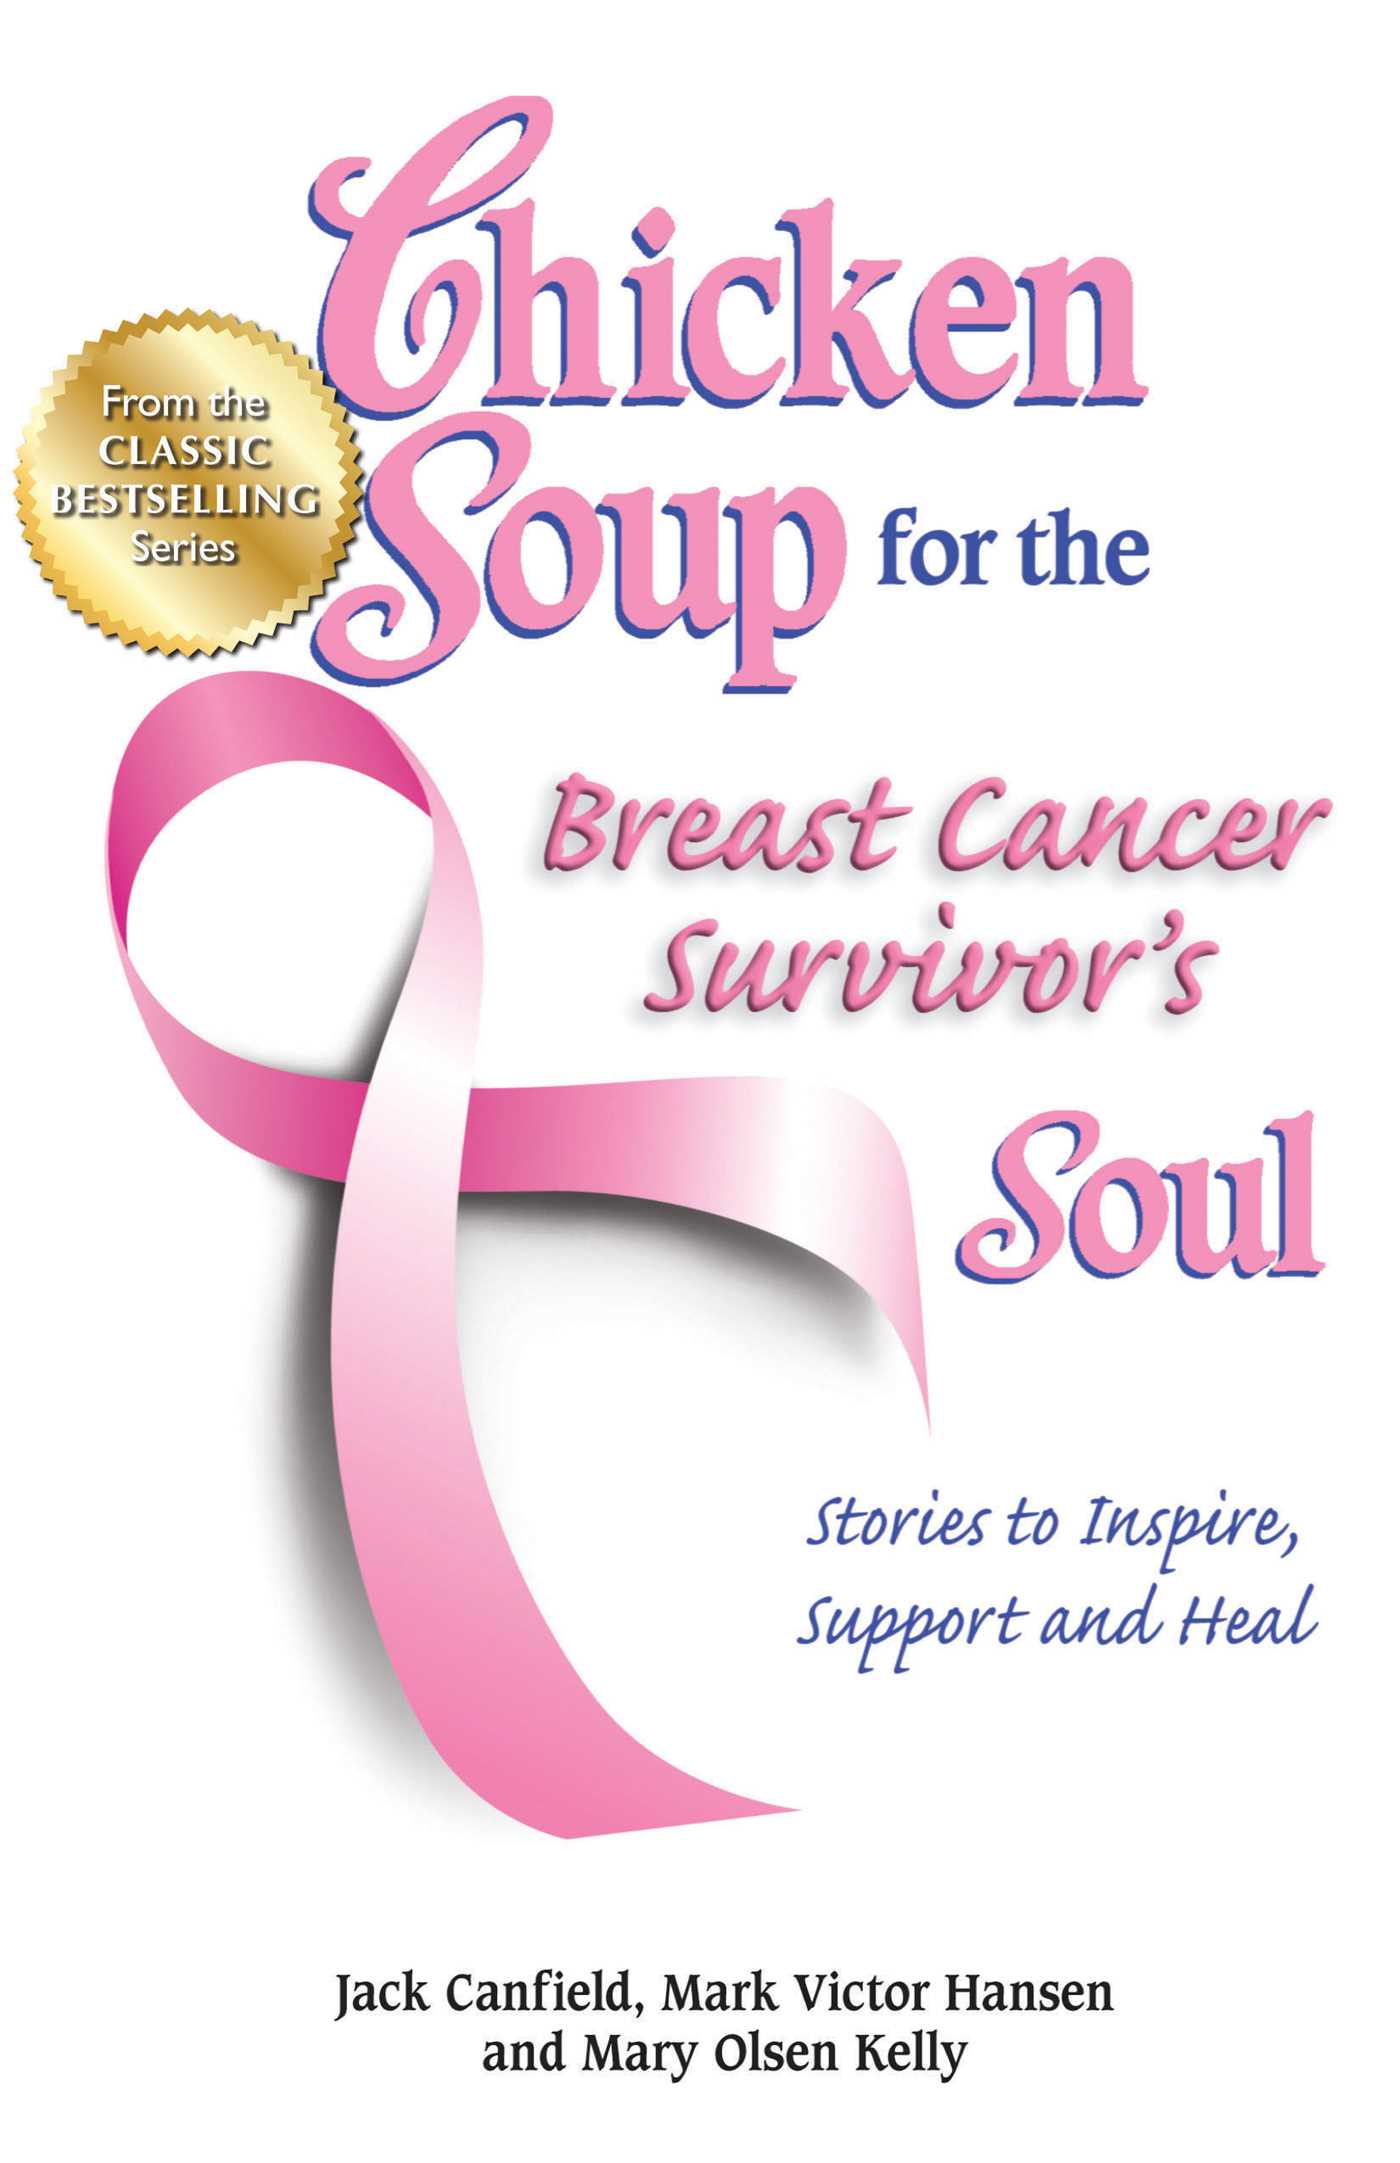 Chicken Soup for the Breast Cancer Survivor's Soul...